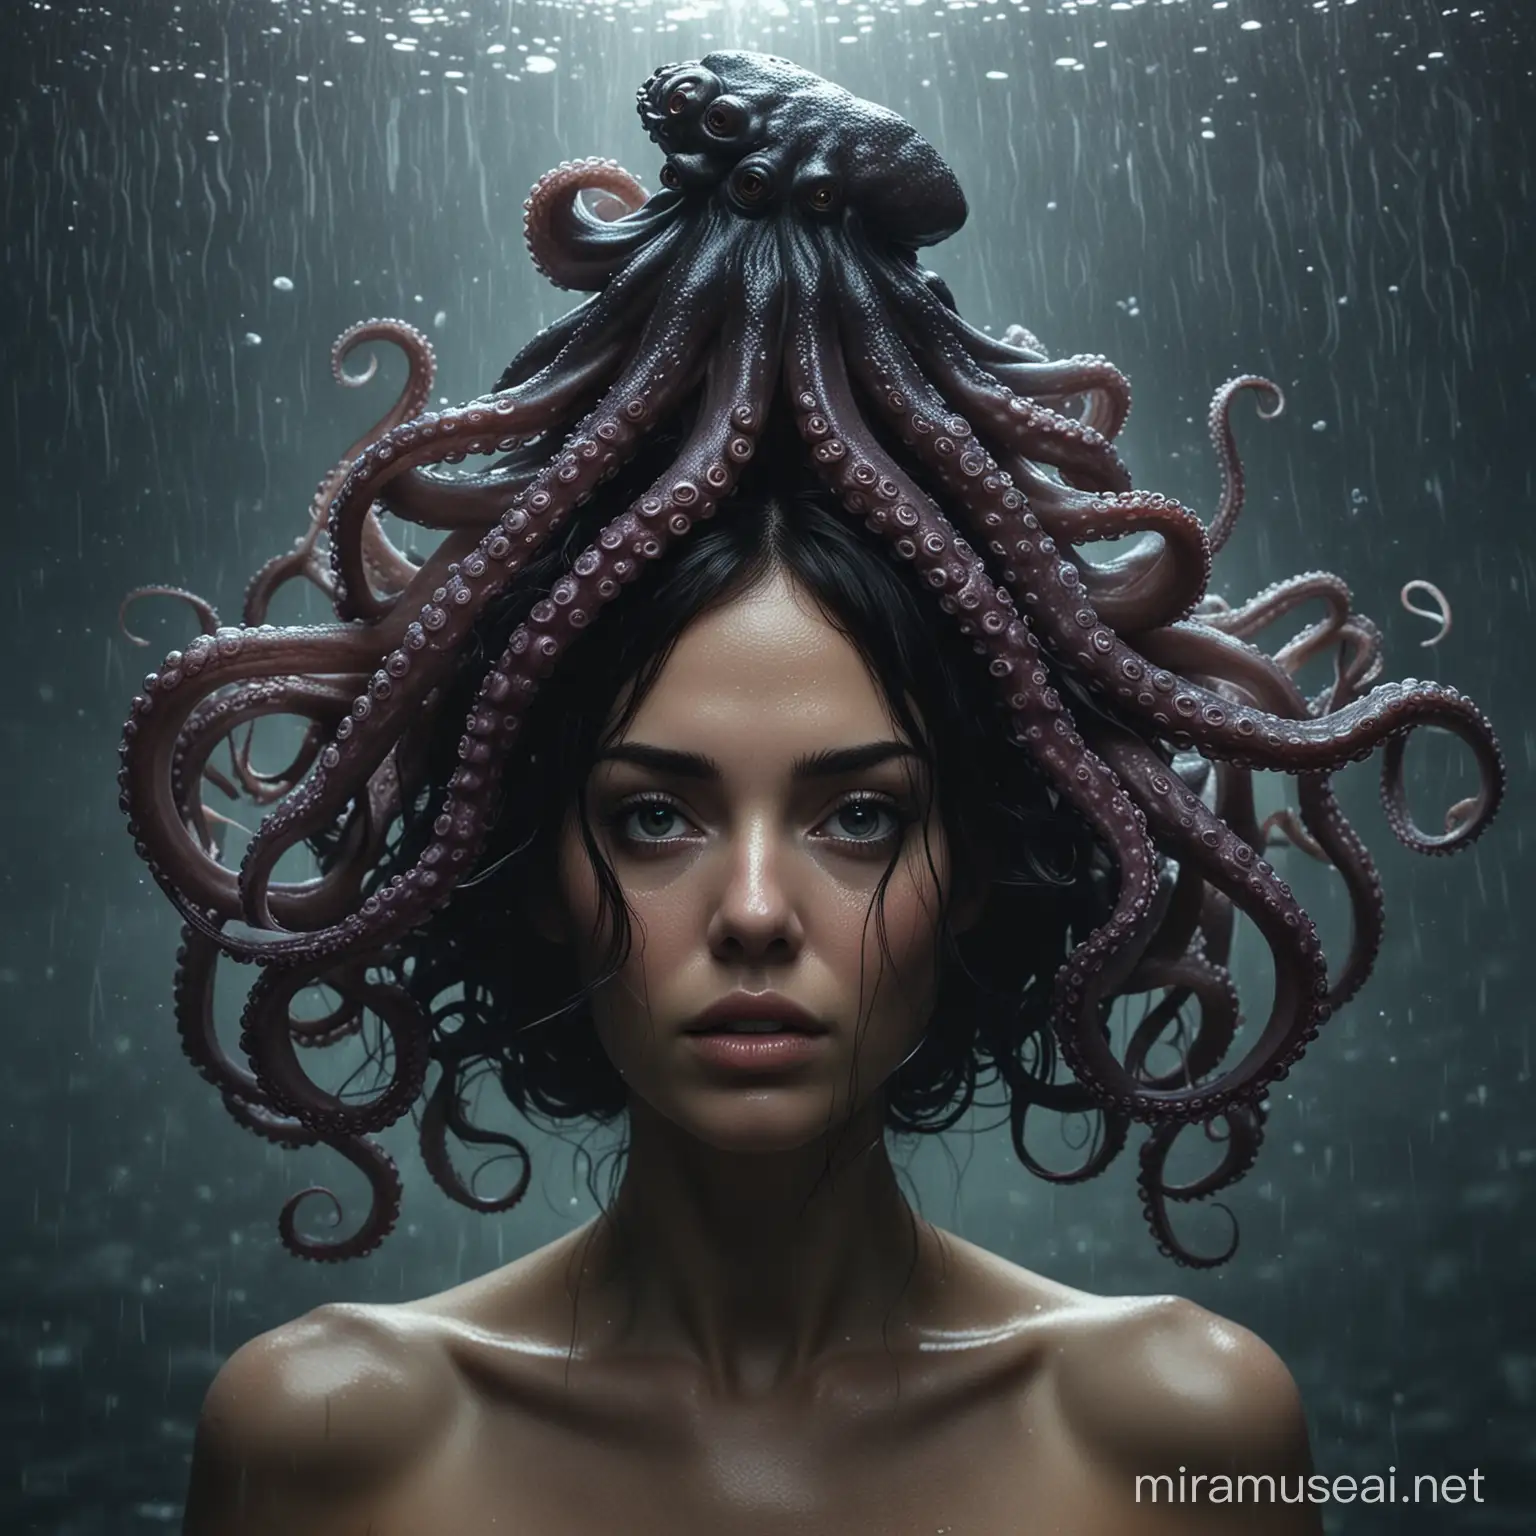 Mysterious Woman with Octopus Headdress in a Cinematic Dreamscape